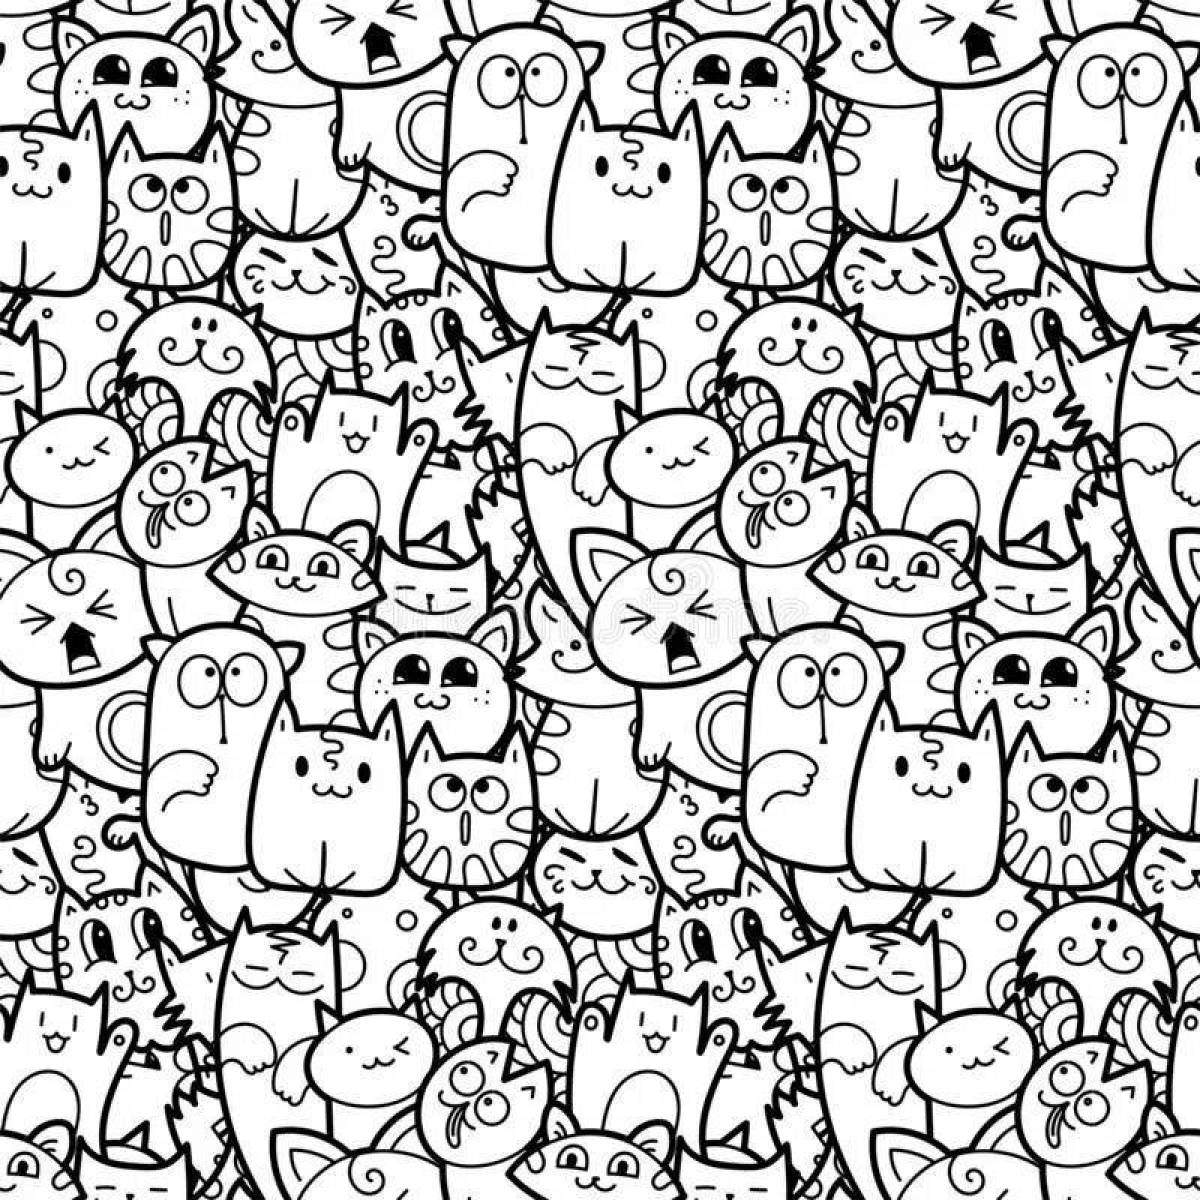 Fun coloring book with lots of cats